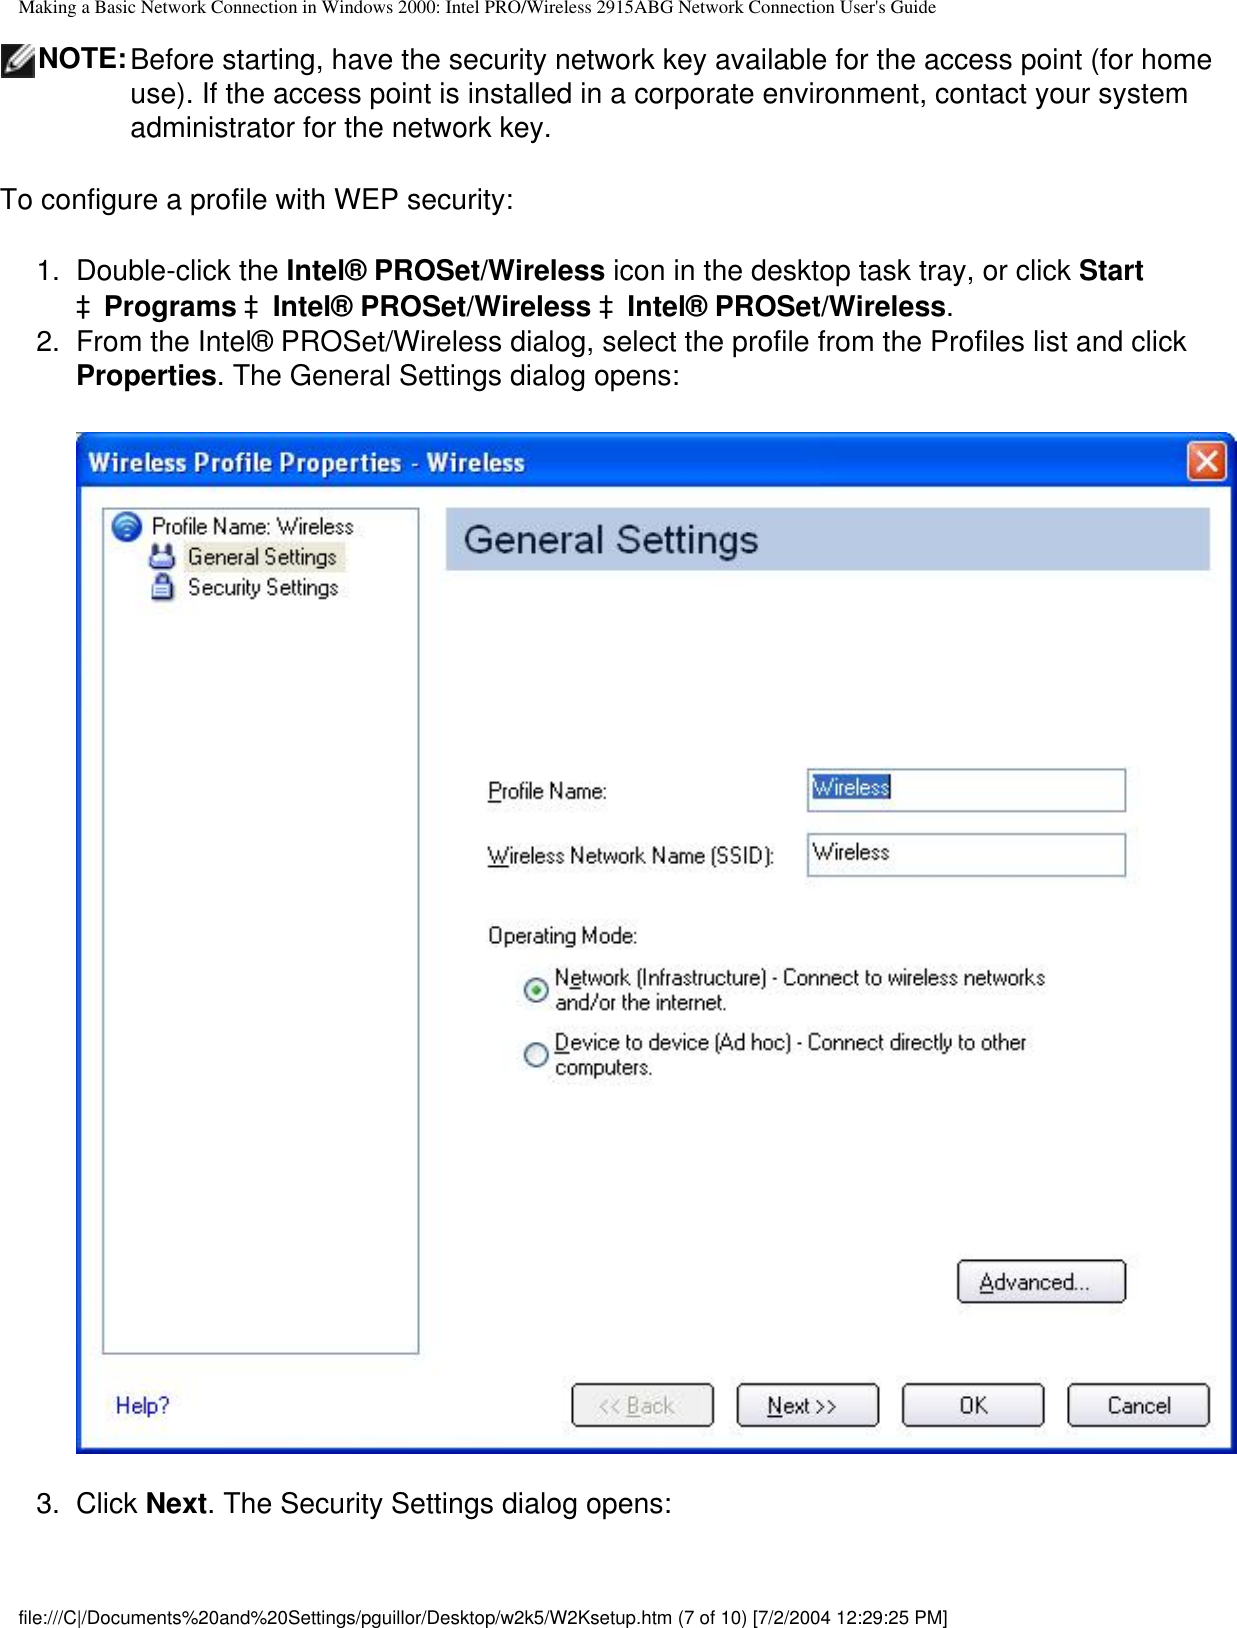 Making a Basic Network Connection in Windows 2000: Intel PRO/Wireless 2915ABG Network Connection User&apos;s GuideNOTE:Before starting, have the security network key available for the access point (for home use). If the access point is installed in a corporate environment, contact your system administrator for the network key. To configure a profile with WEP security:1.  Double-click the Intel® PROSet/Wireless icon in the desktop task tray, or click Start àPrograms àIntel® PROSet/Wireless àIntel® PROSet/Wireless.2.  From the Intel® PROSet/Wireless dialog, select the profile from the Profiles list and click Properties. The General Settings dialog opens:3.  Click Next. The Security Settings dialog opens:file:///C|/Documents%20and%20Settings/pguillor/Desktop/w2k5/W2Ksetup.htm (7 of 10) [7/2/2004 12:29:25 PM]